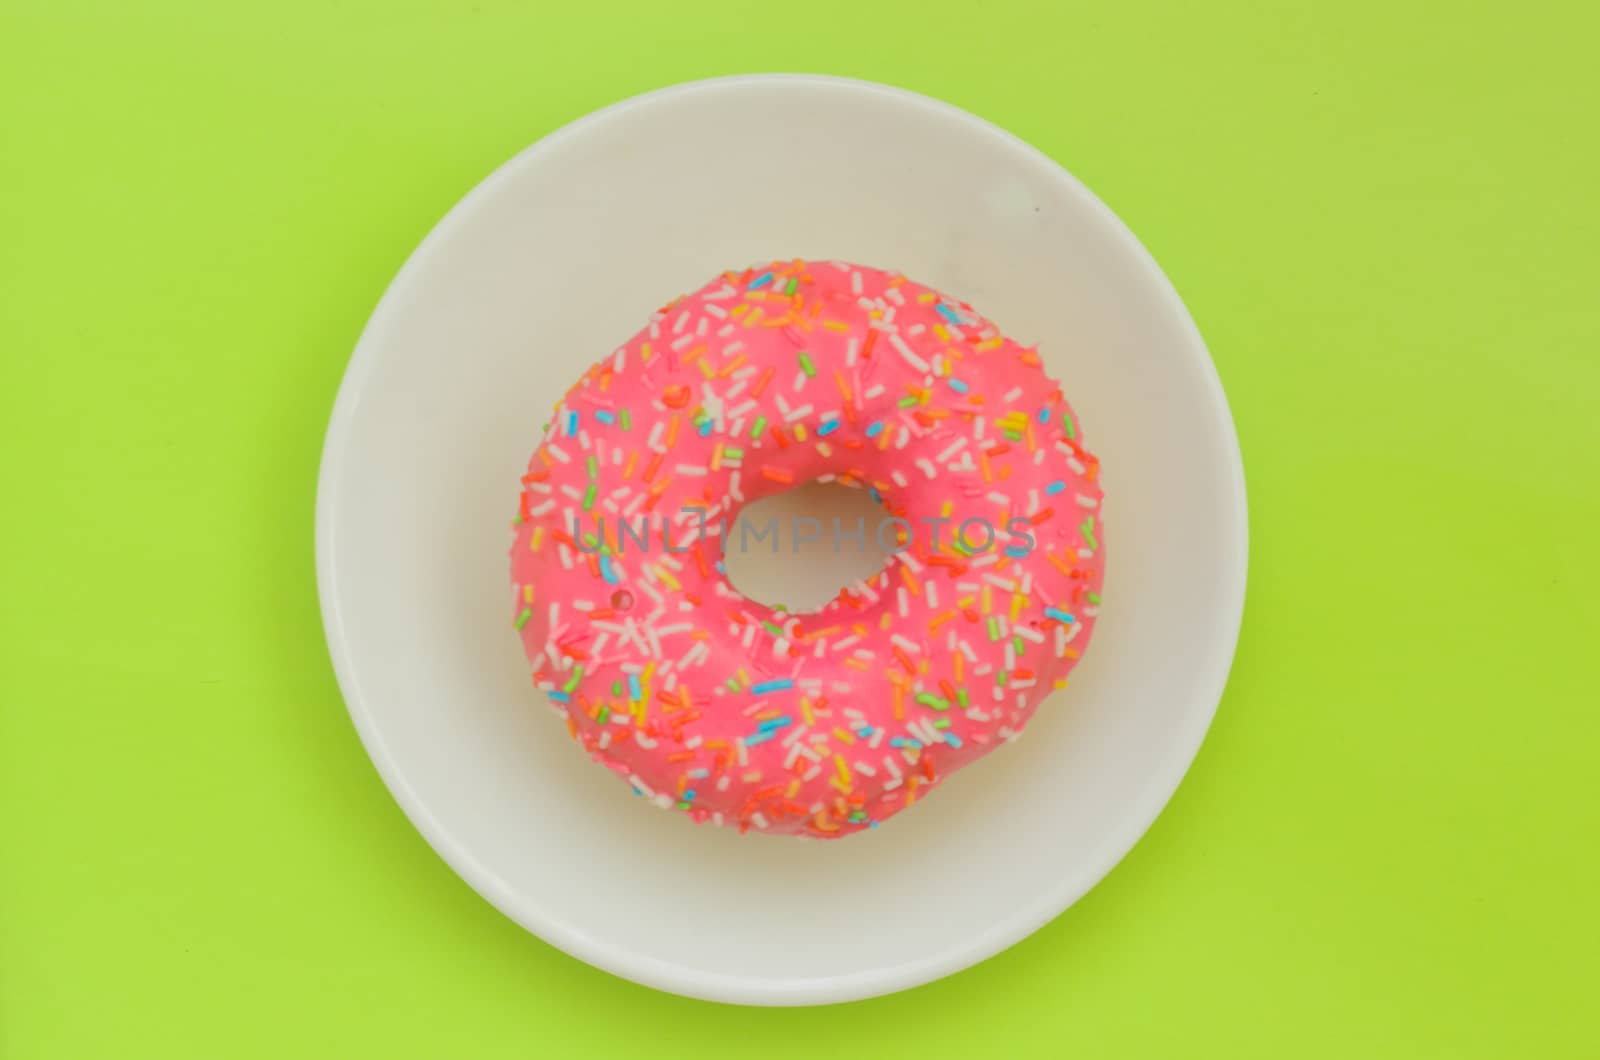 One pink glazed donut on white plate on green background, sweet dessert for snack.